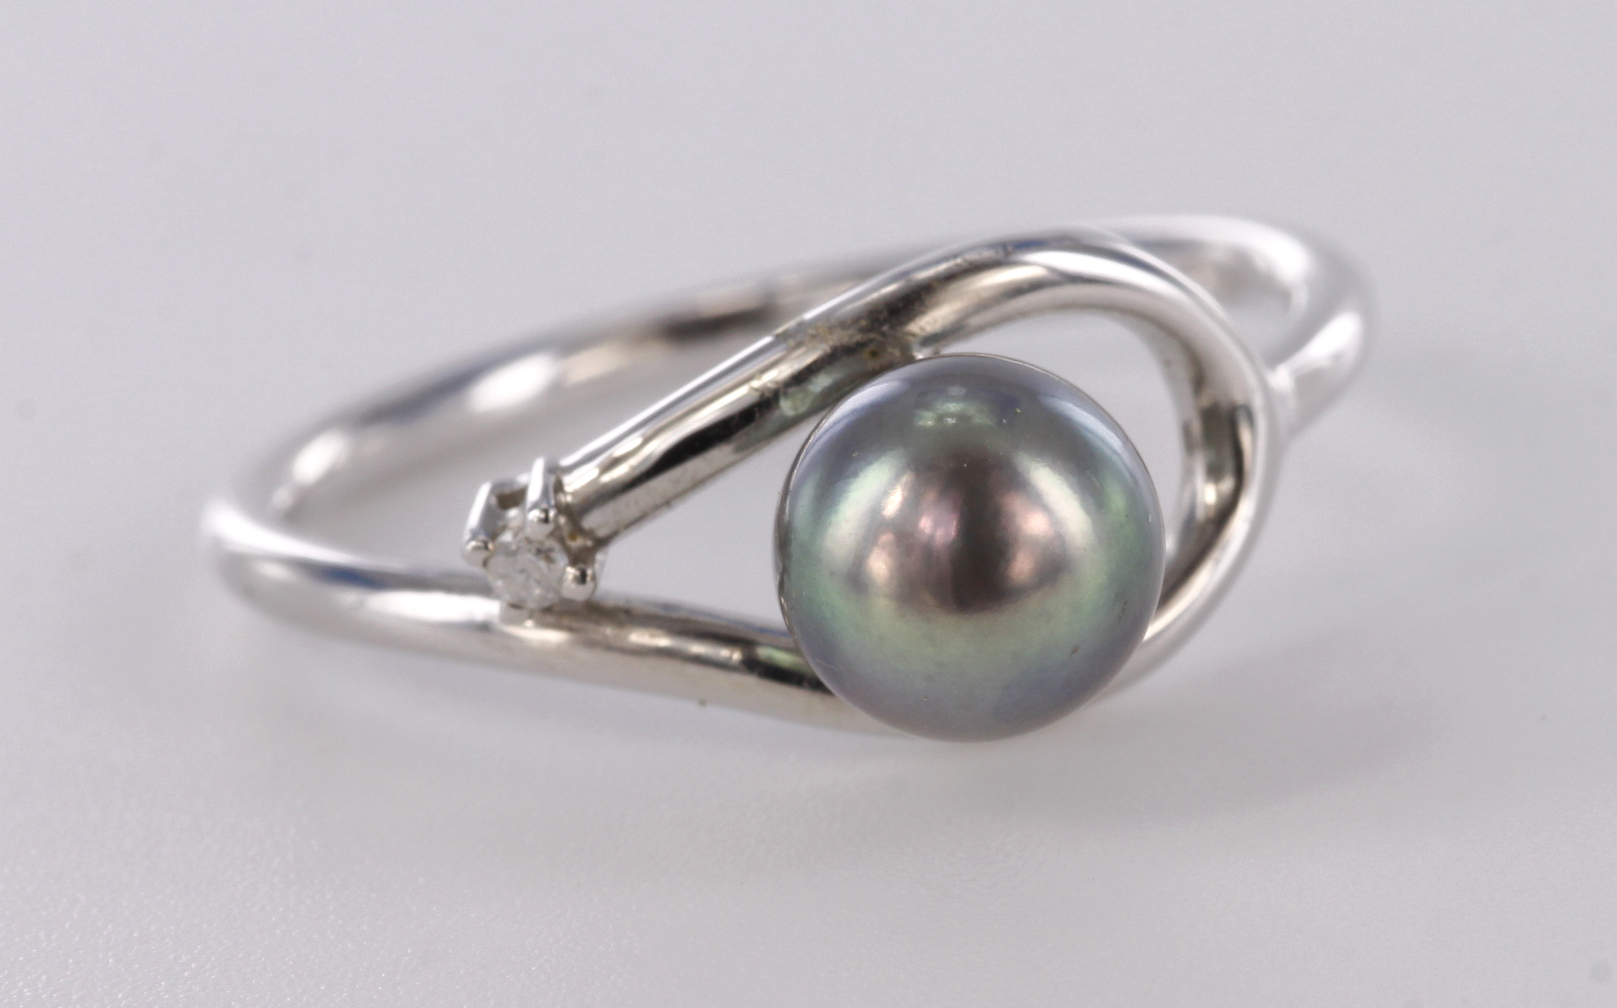 14ct white gold dress ring set with single grey cultured pearl measuring approx. 6mm diameter, prong